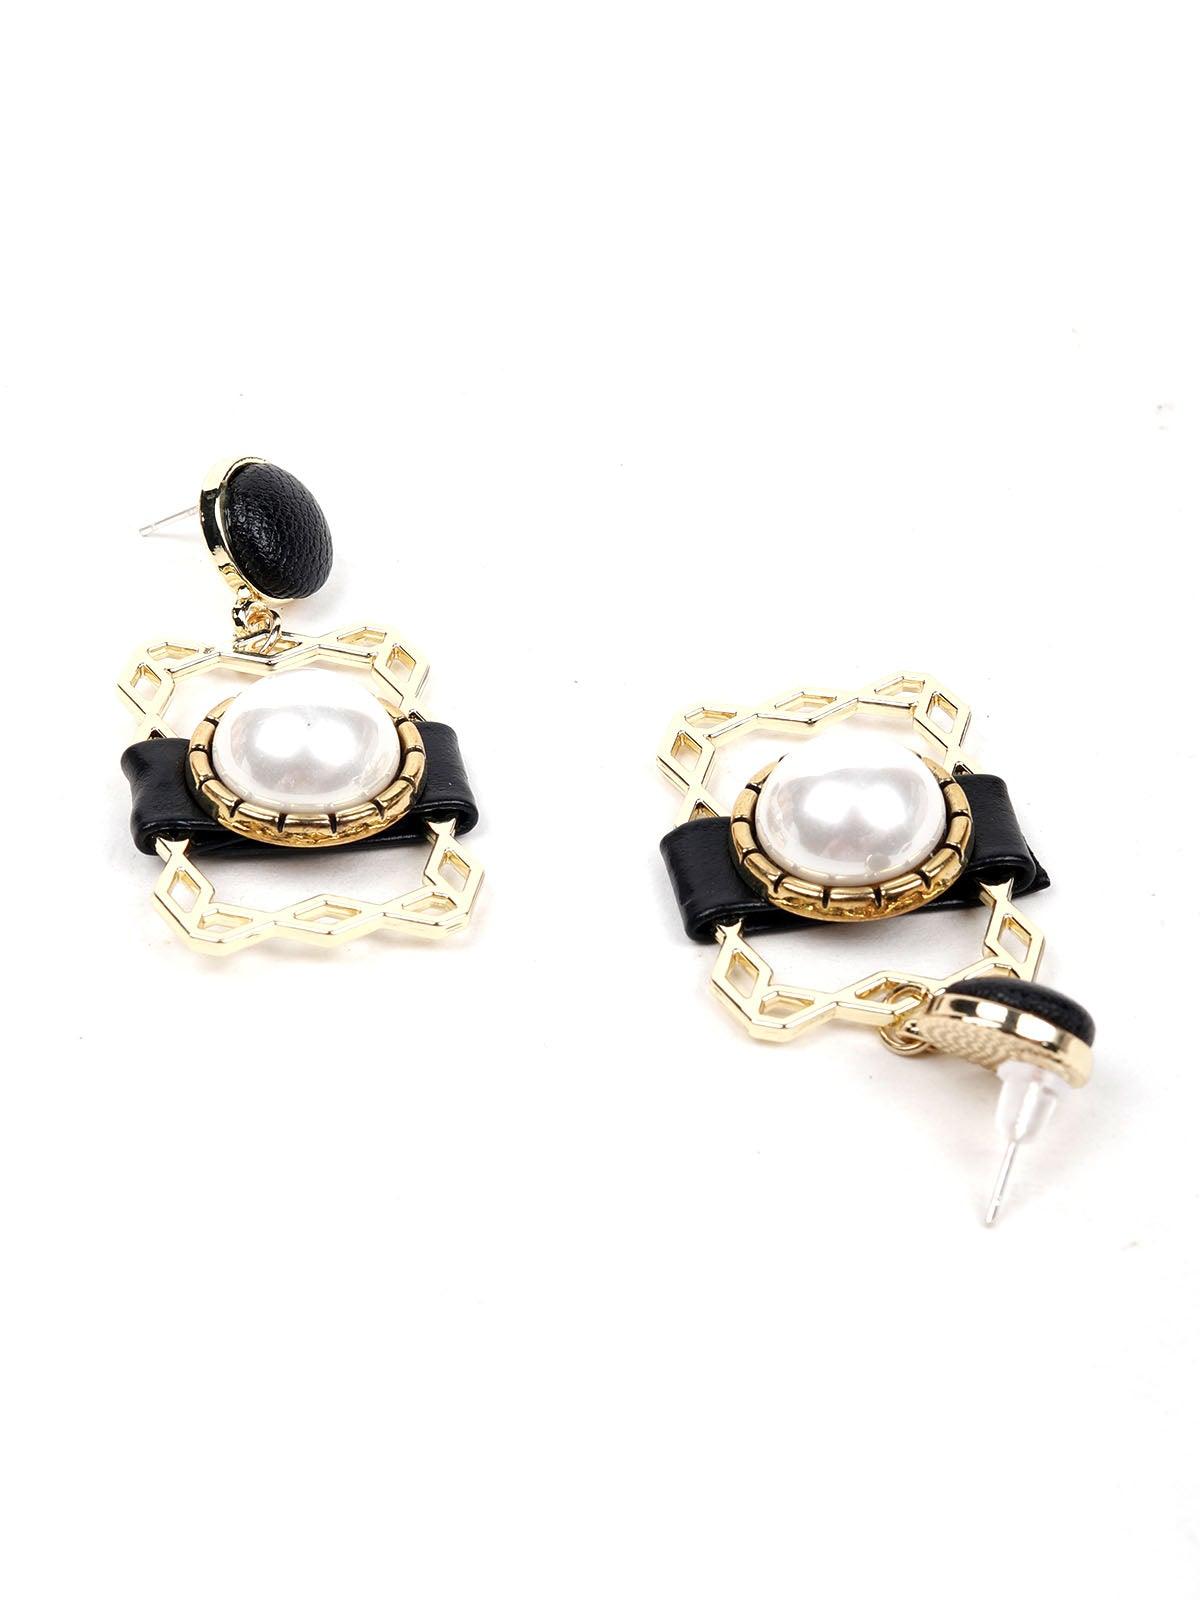 Women's Exquisite Gold Textured Earring With Pearl Embellishments - Odette